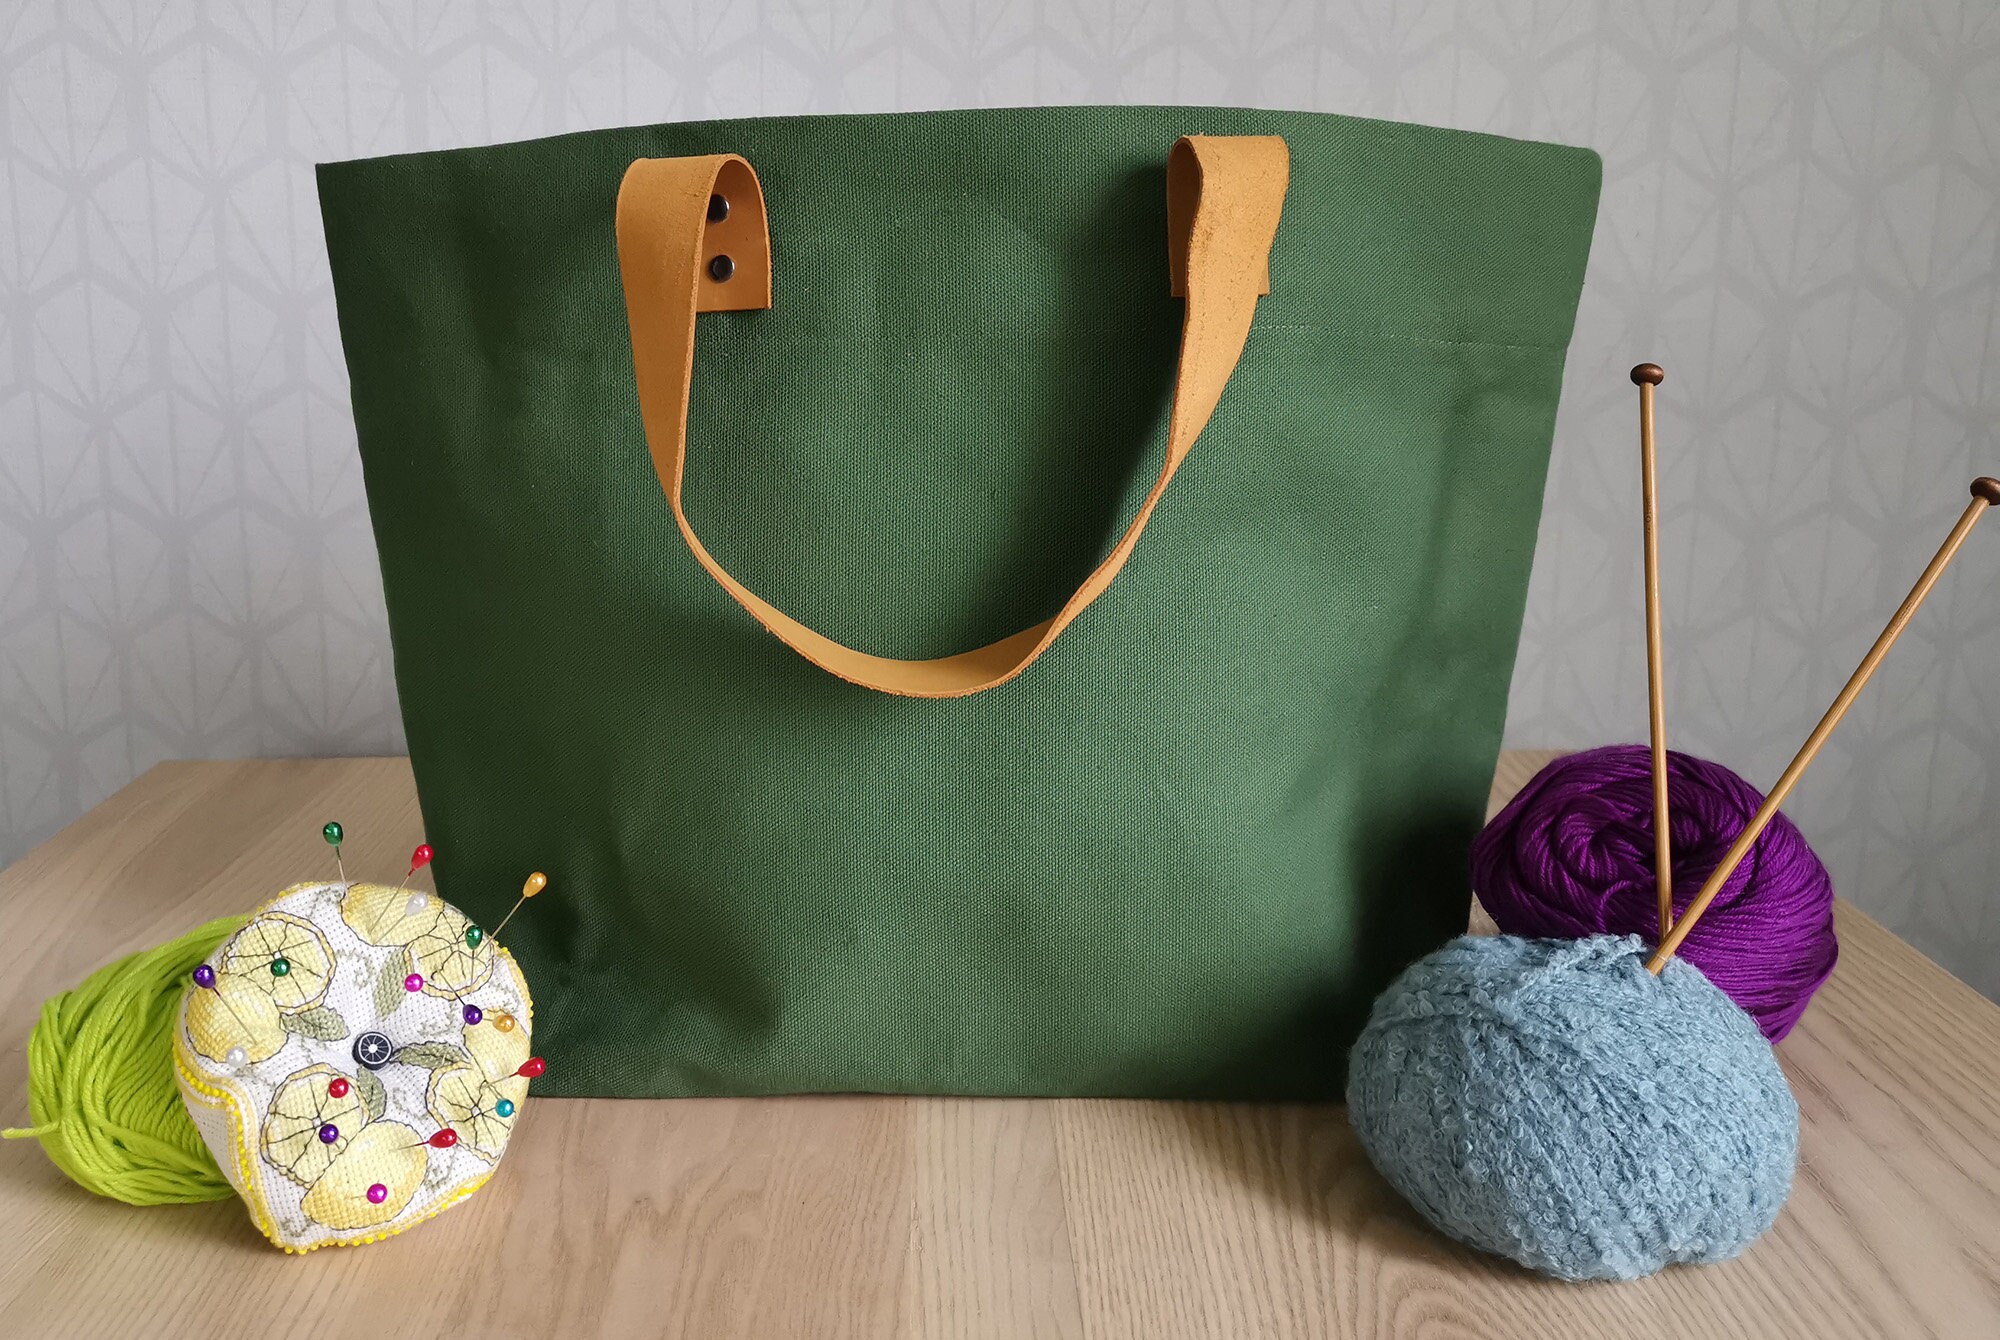 Knitting Totes ~ 6 style options